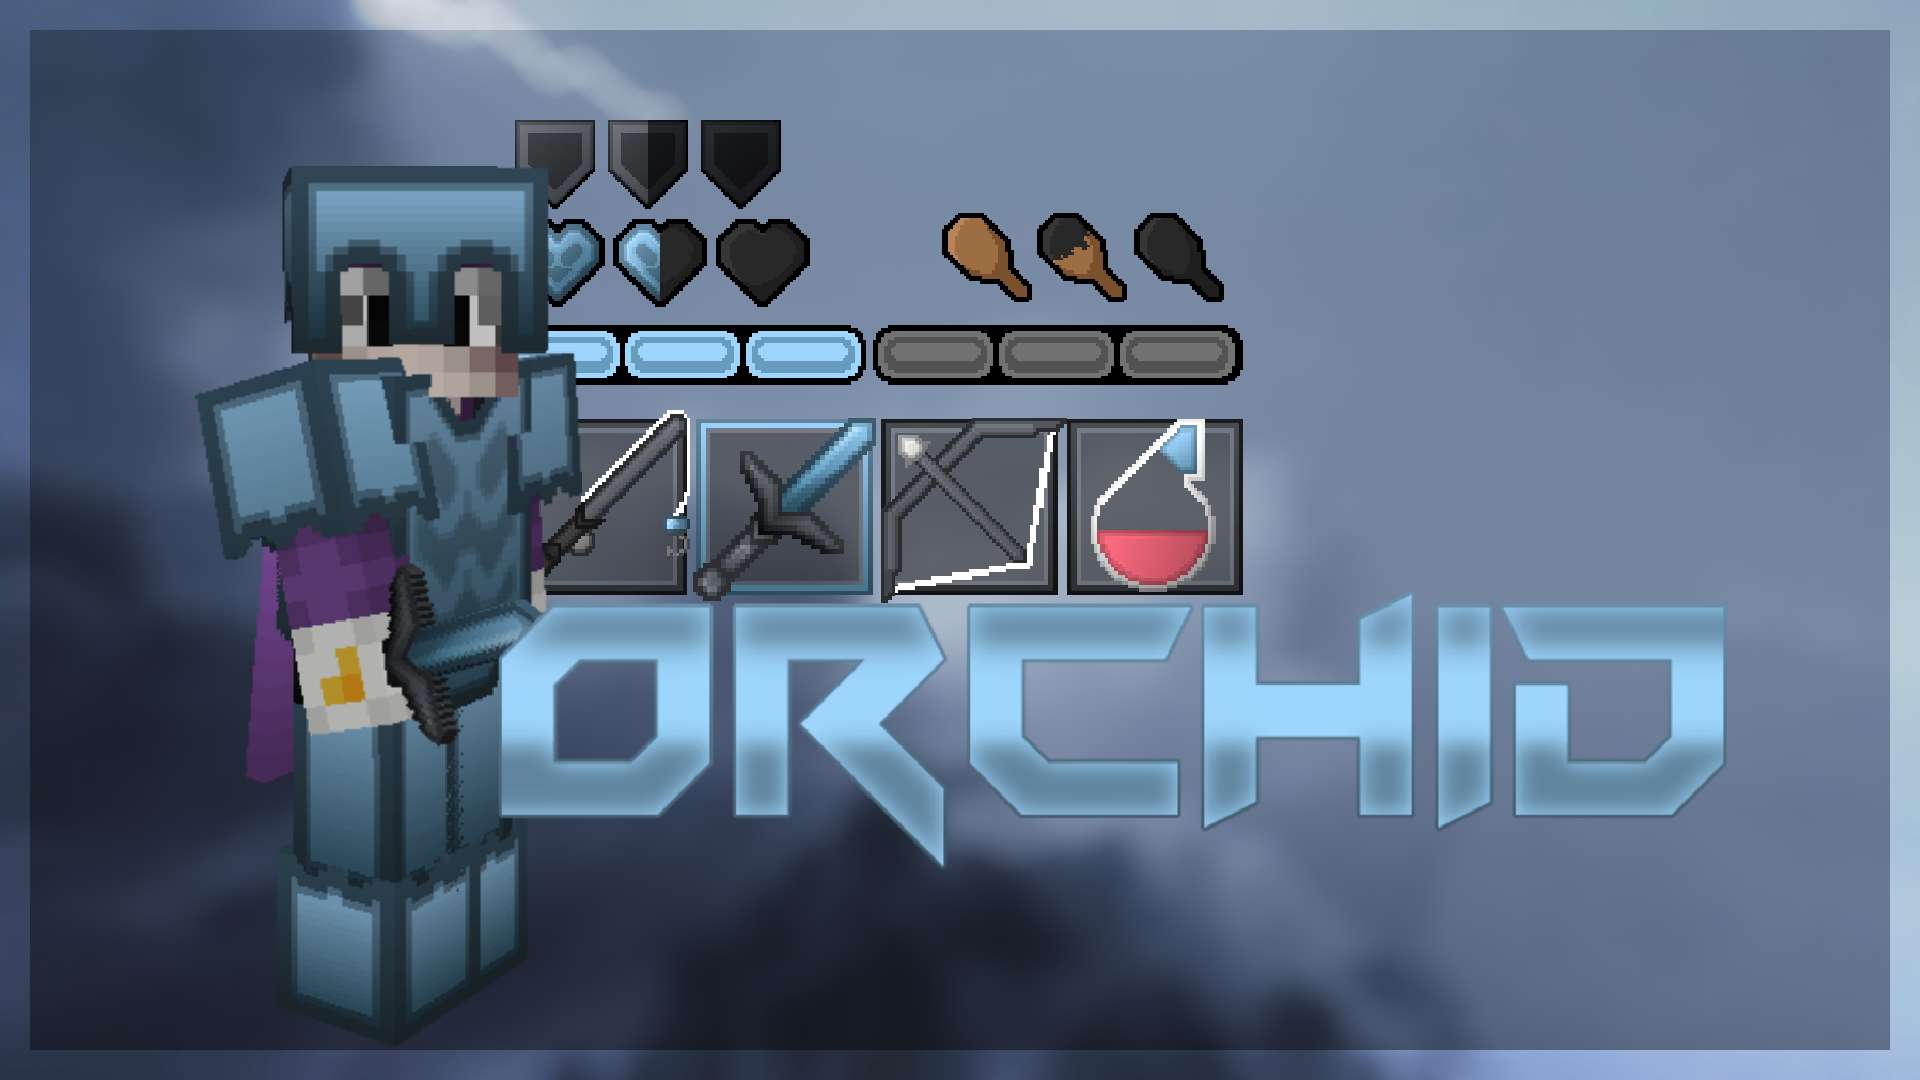 orchid 64x by CyberFUnction on PvPRP